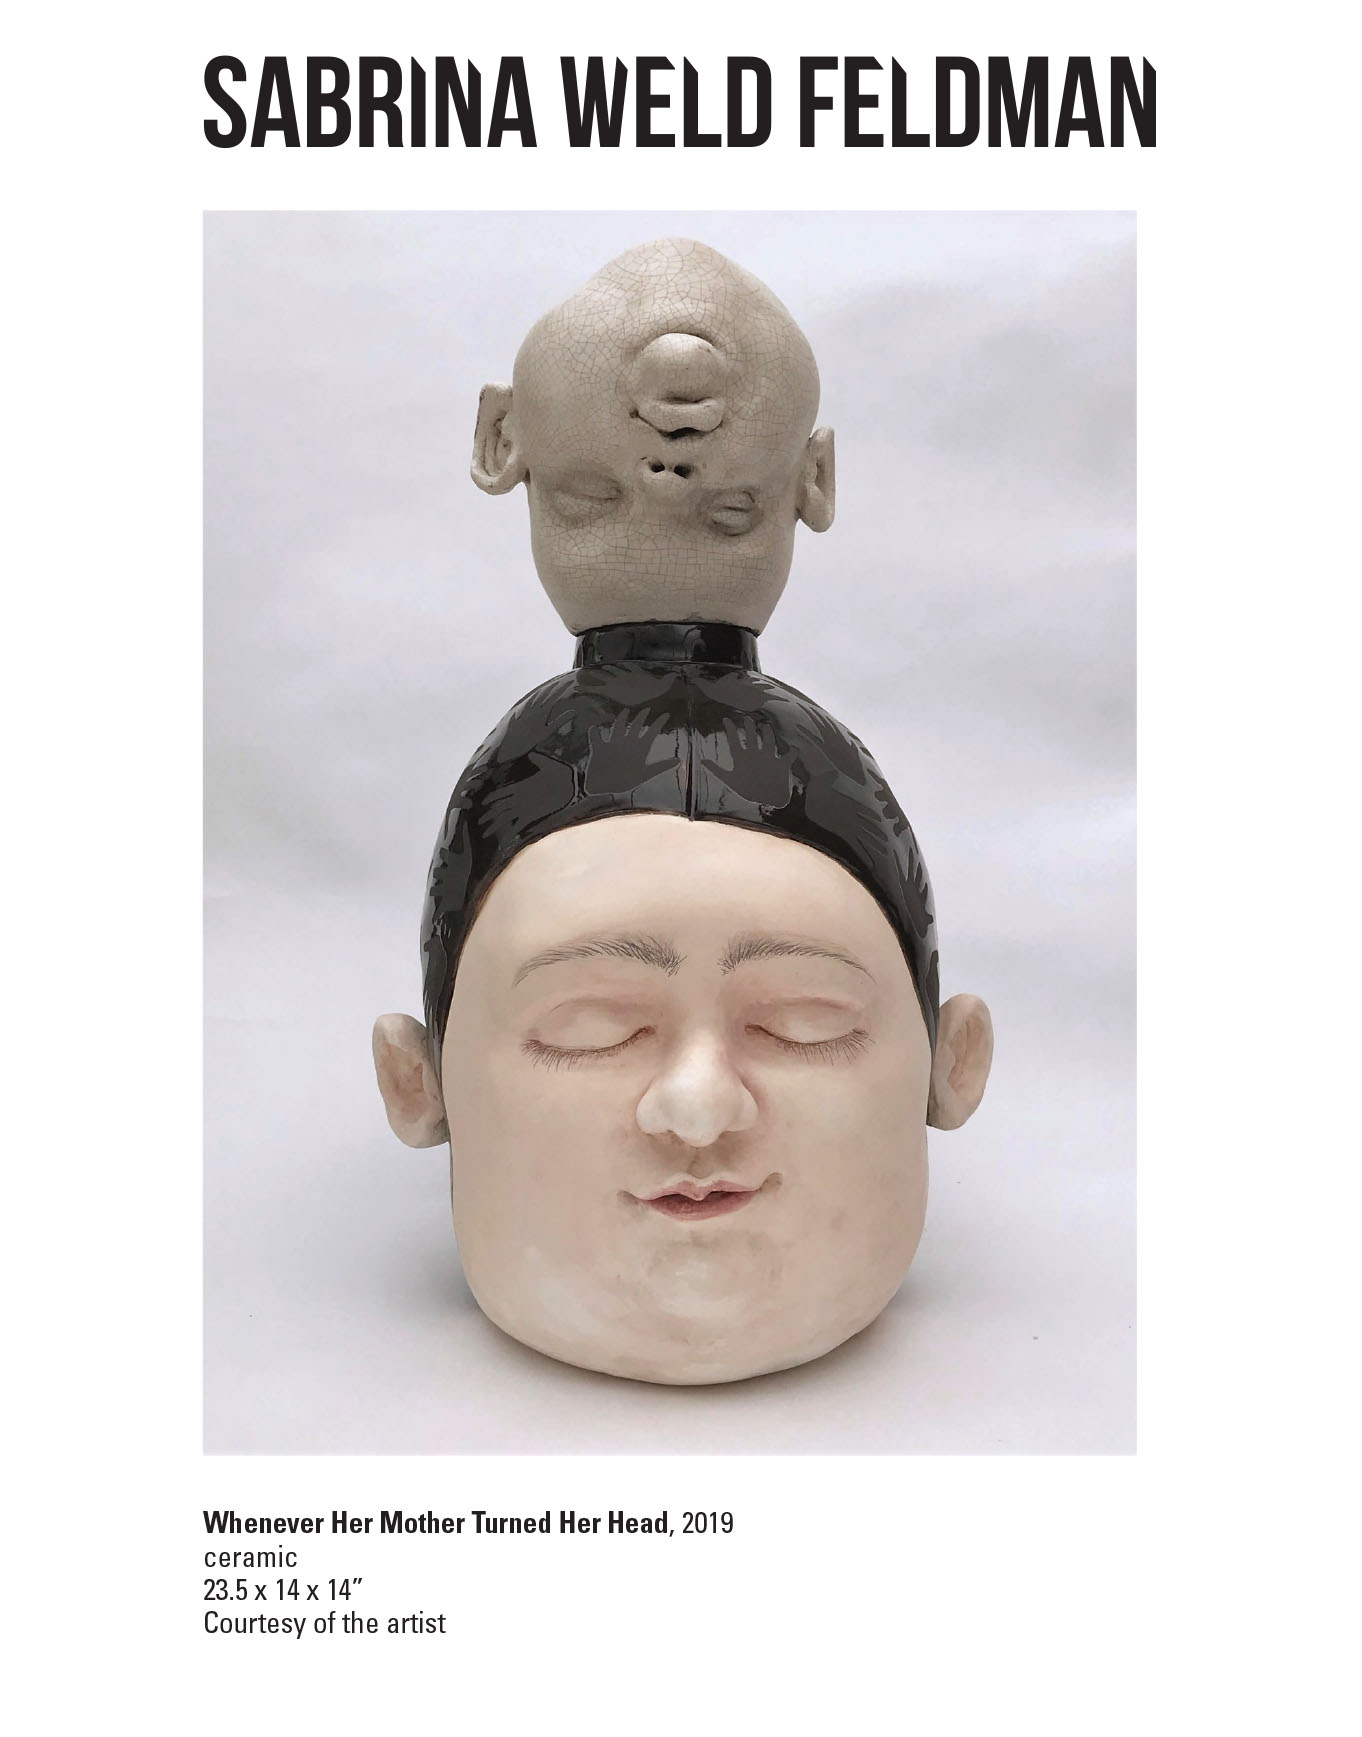 Sabrina Weld Feldman, Whenever Her Mother Turned Her Head, 2019. Ceramic. 23.5 x 14 x 14” Courtesy of the artist. A ceramic sculpture of a upside down head on top of a larger head with its eyes closed.